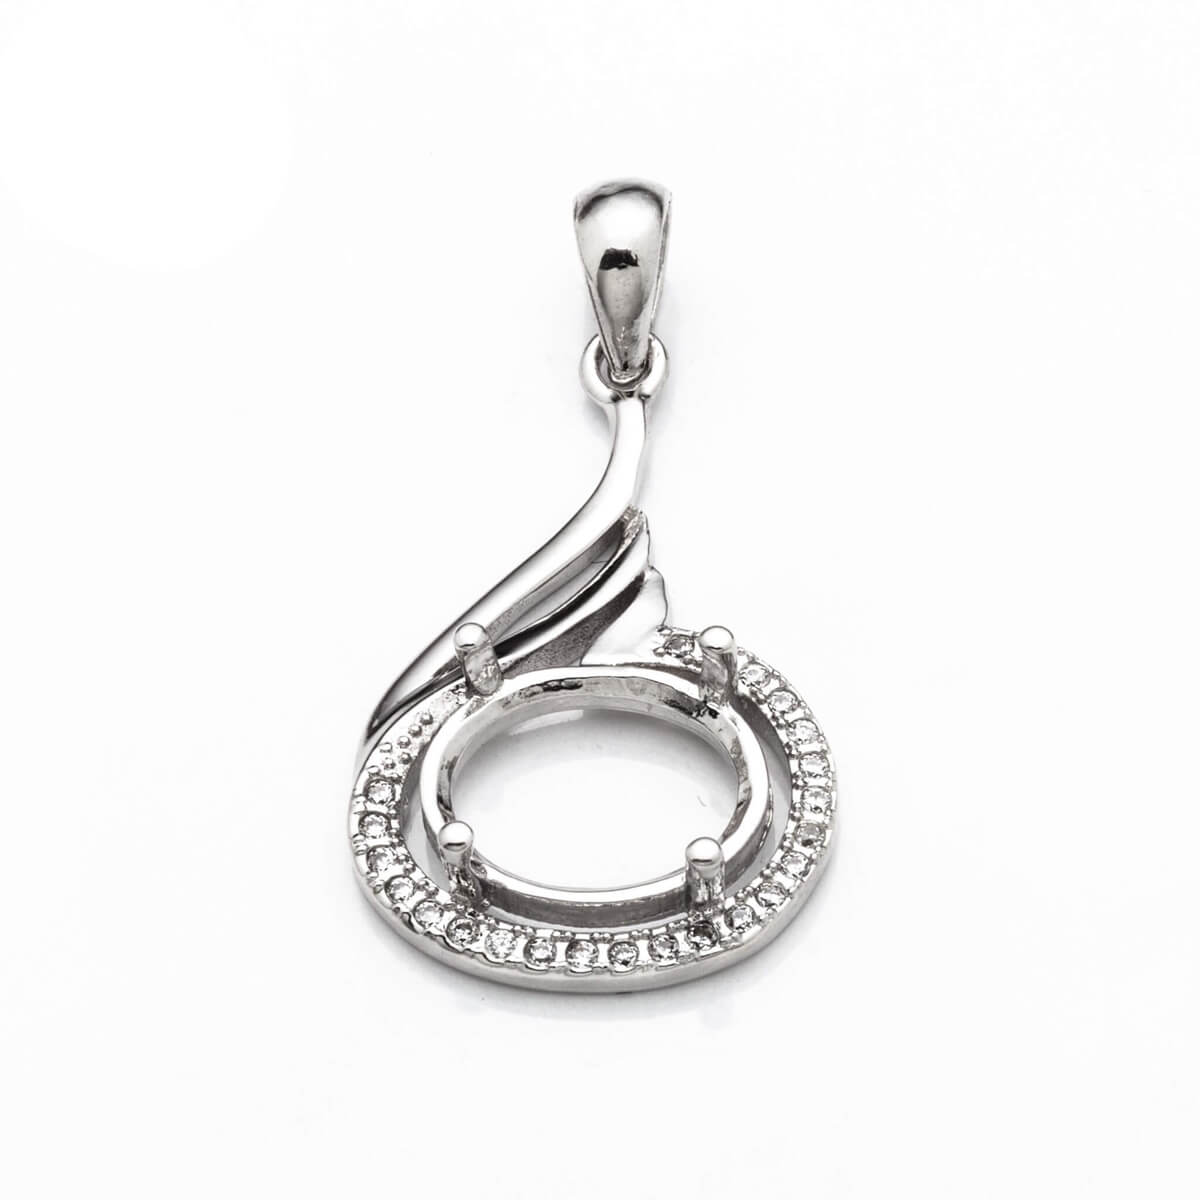 Oval Pendant with Cubic Zirconia Inlays and Oval Mounting and Bail in Sterling Silver 8x10mm